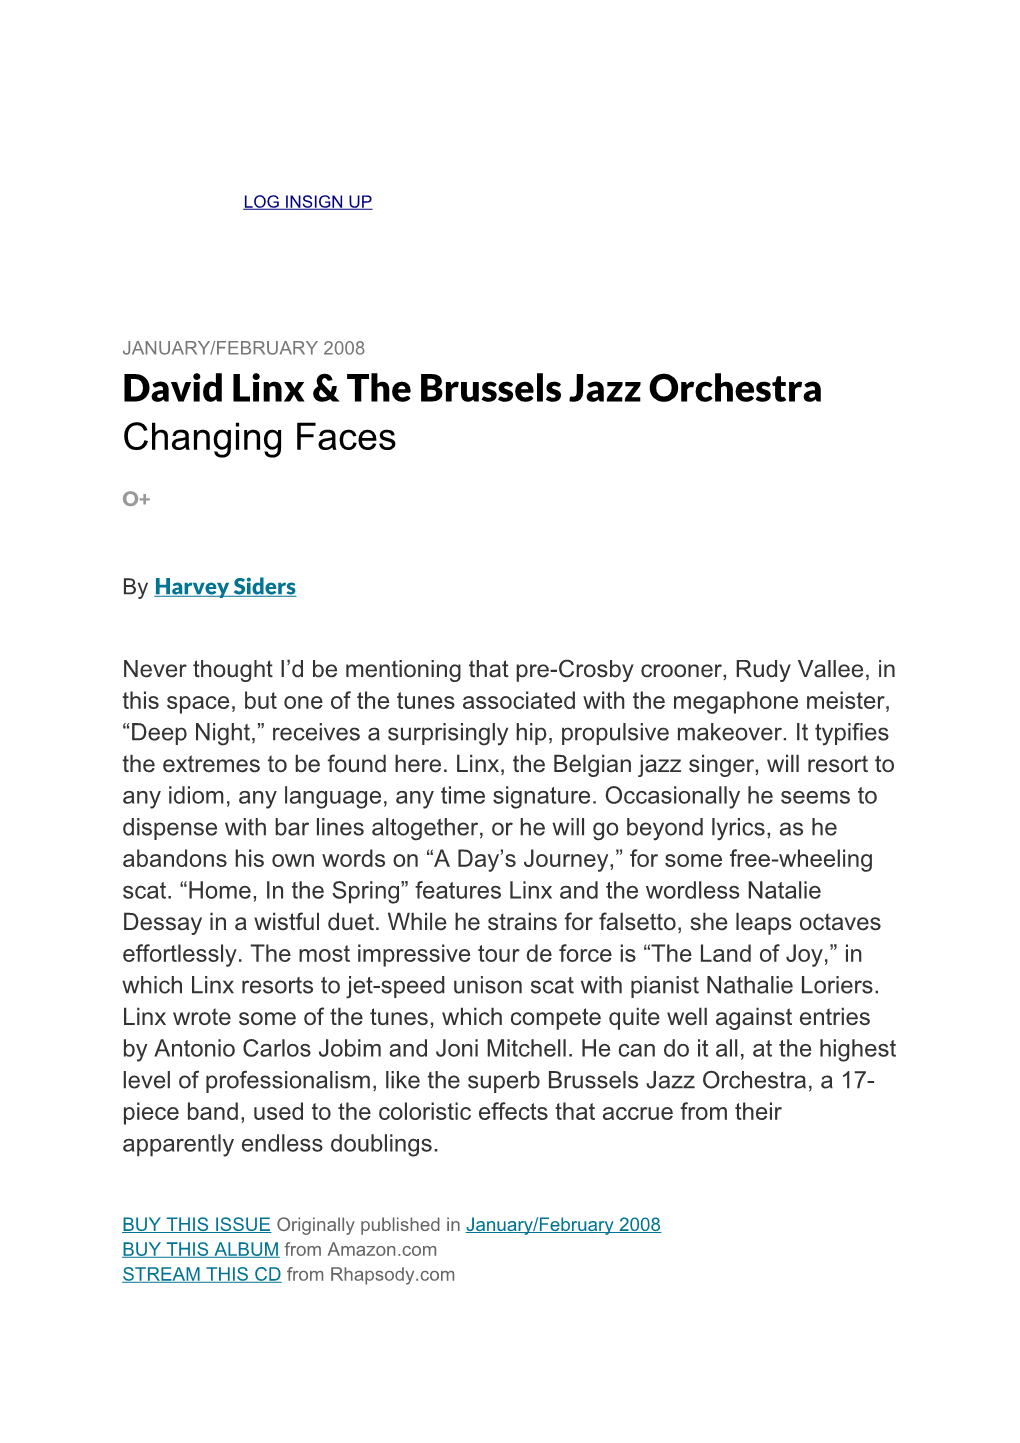 David Linx & the Brussels Jazz Orchestra Changing Faces